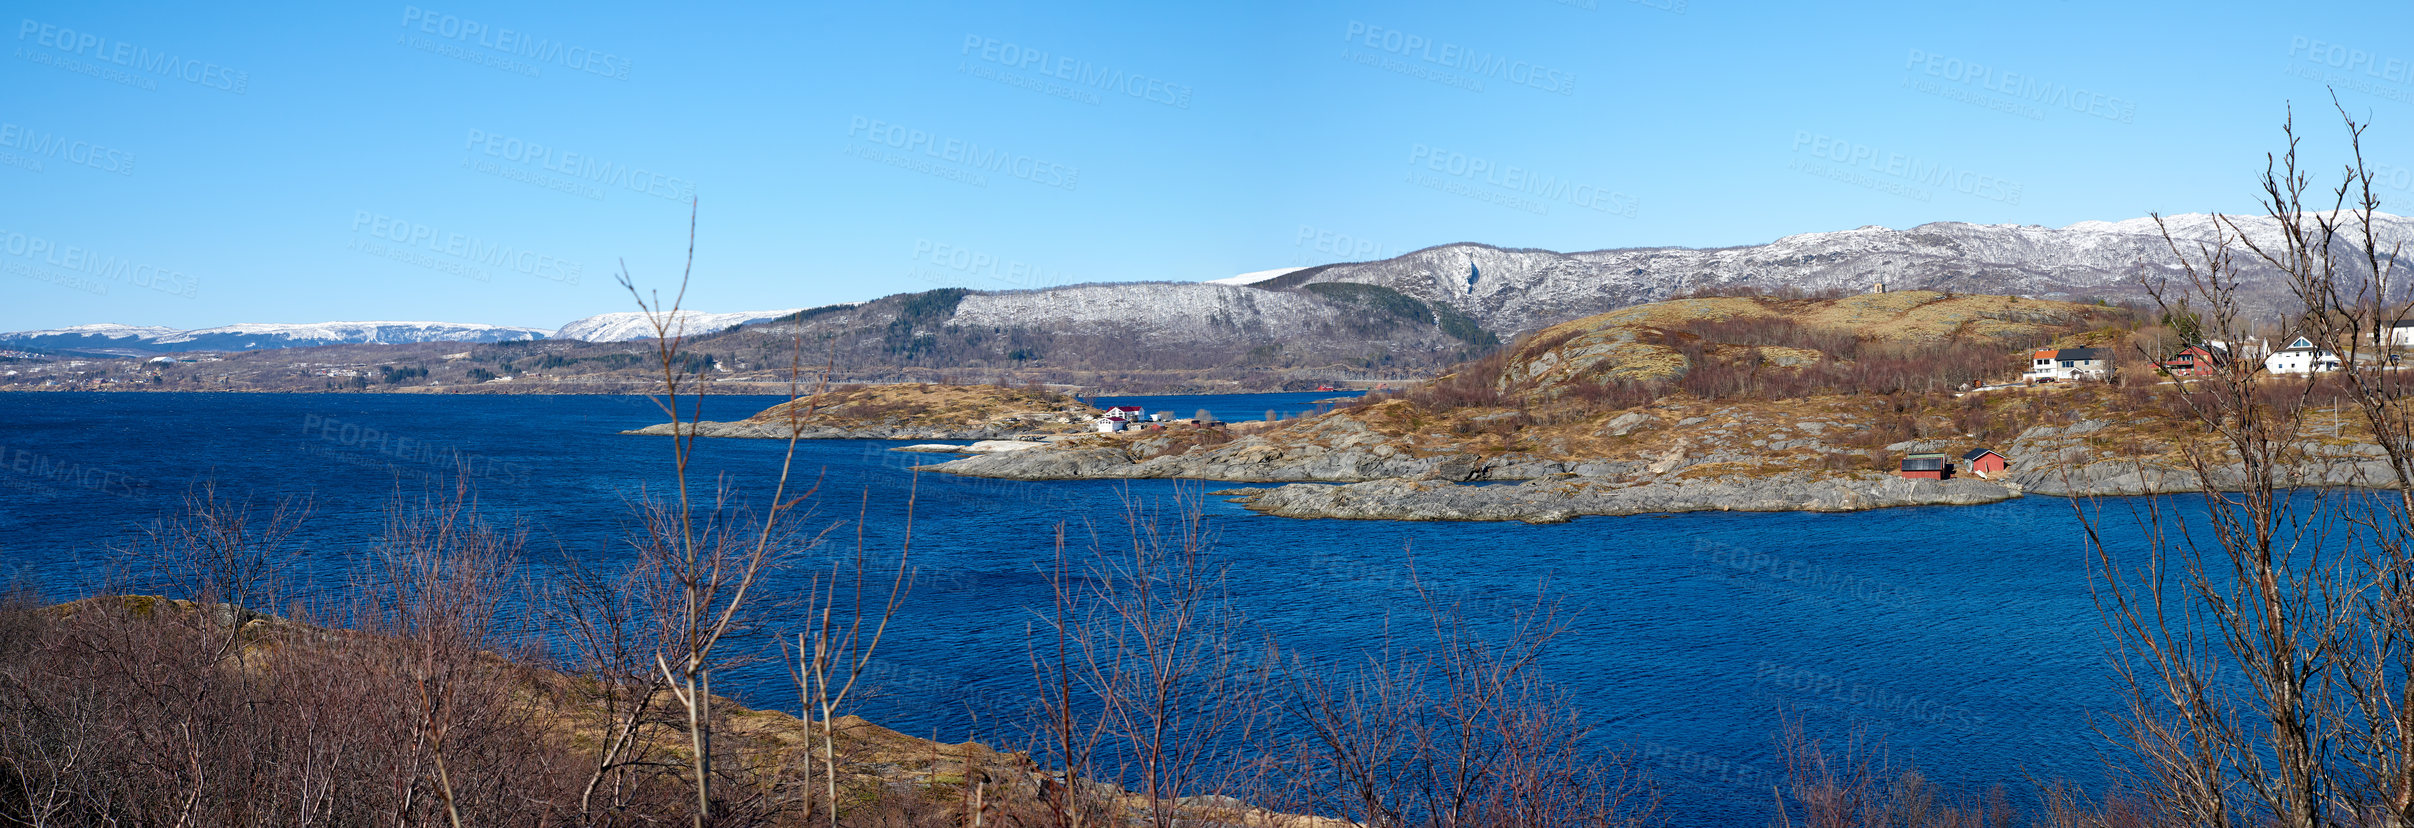 Buy stock photo The city of Bodo and its surroundings during the day in summer. Landscape view of a lake against a blue sky in the countryside. Peaceful and quiet vacation destination in a rustic natural environment